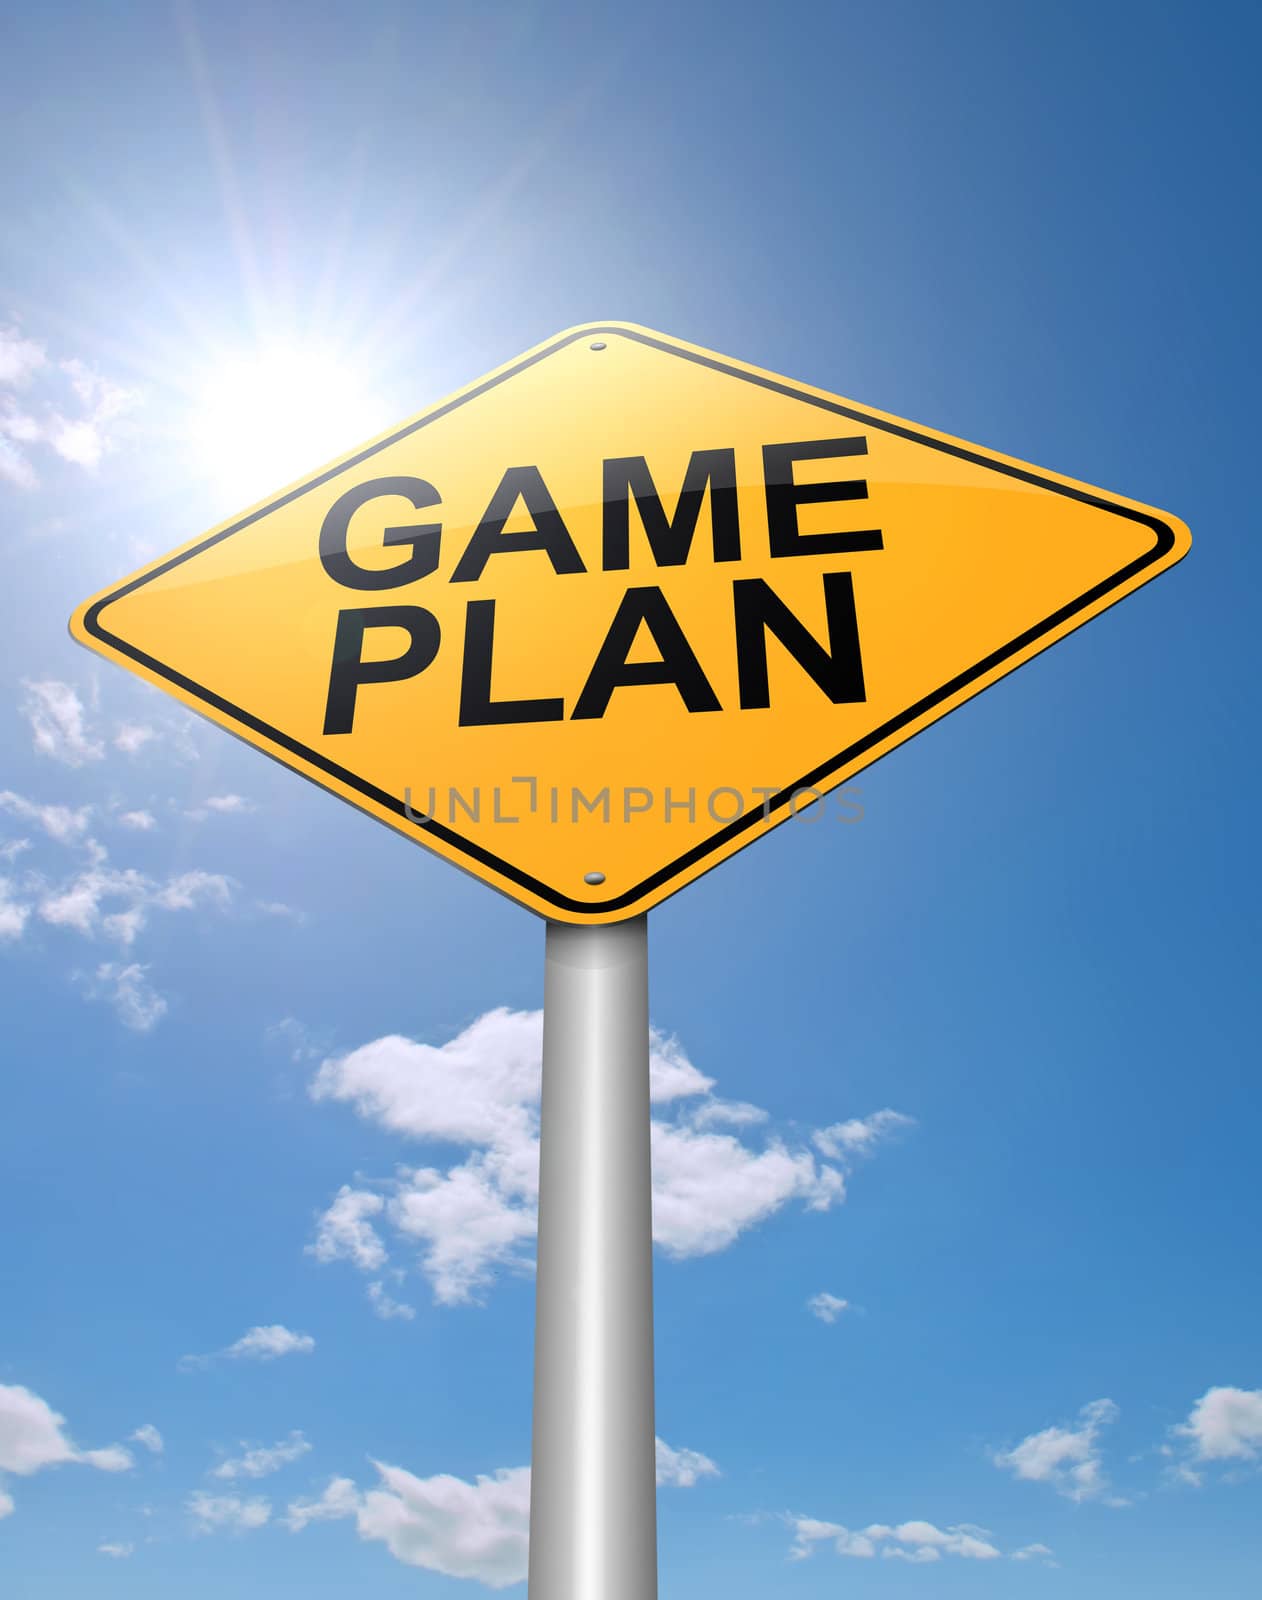 Illustration depicting a roadsign with a game plan concept. Sunlight and sky background.